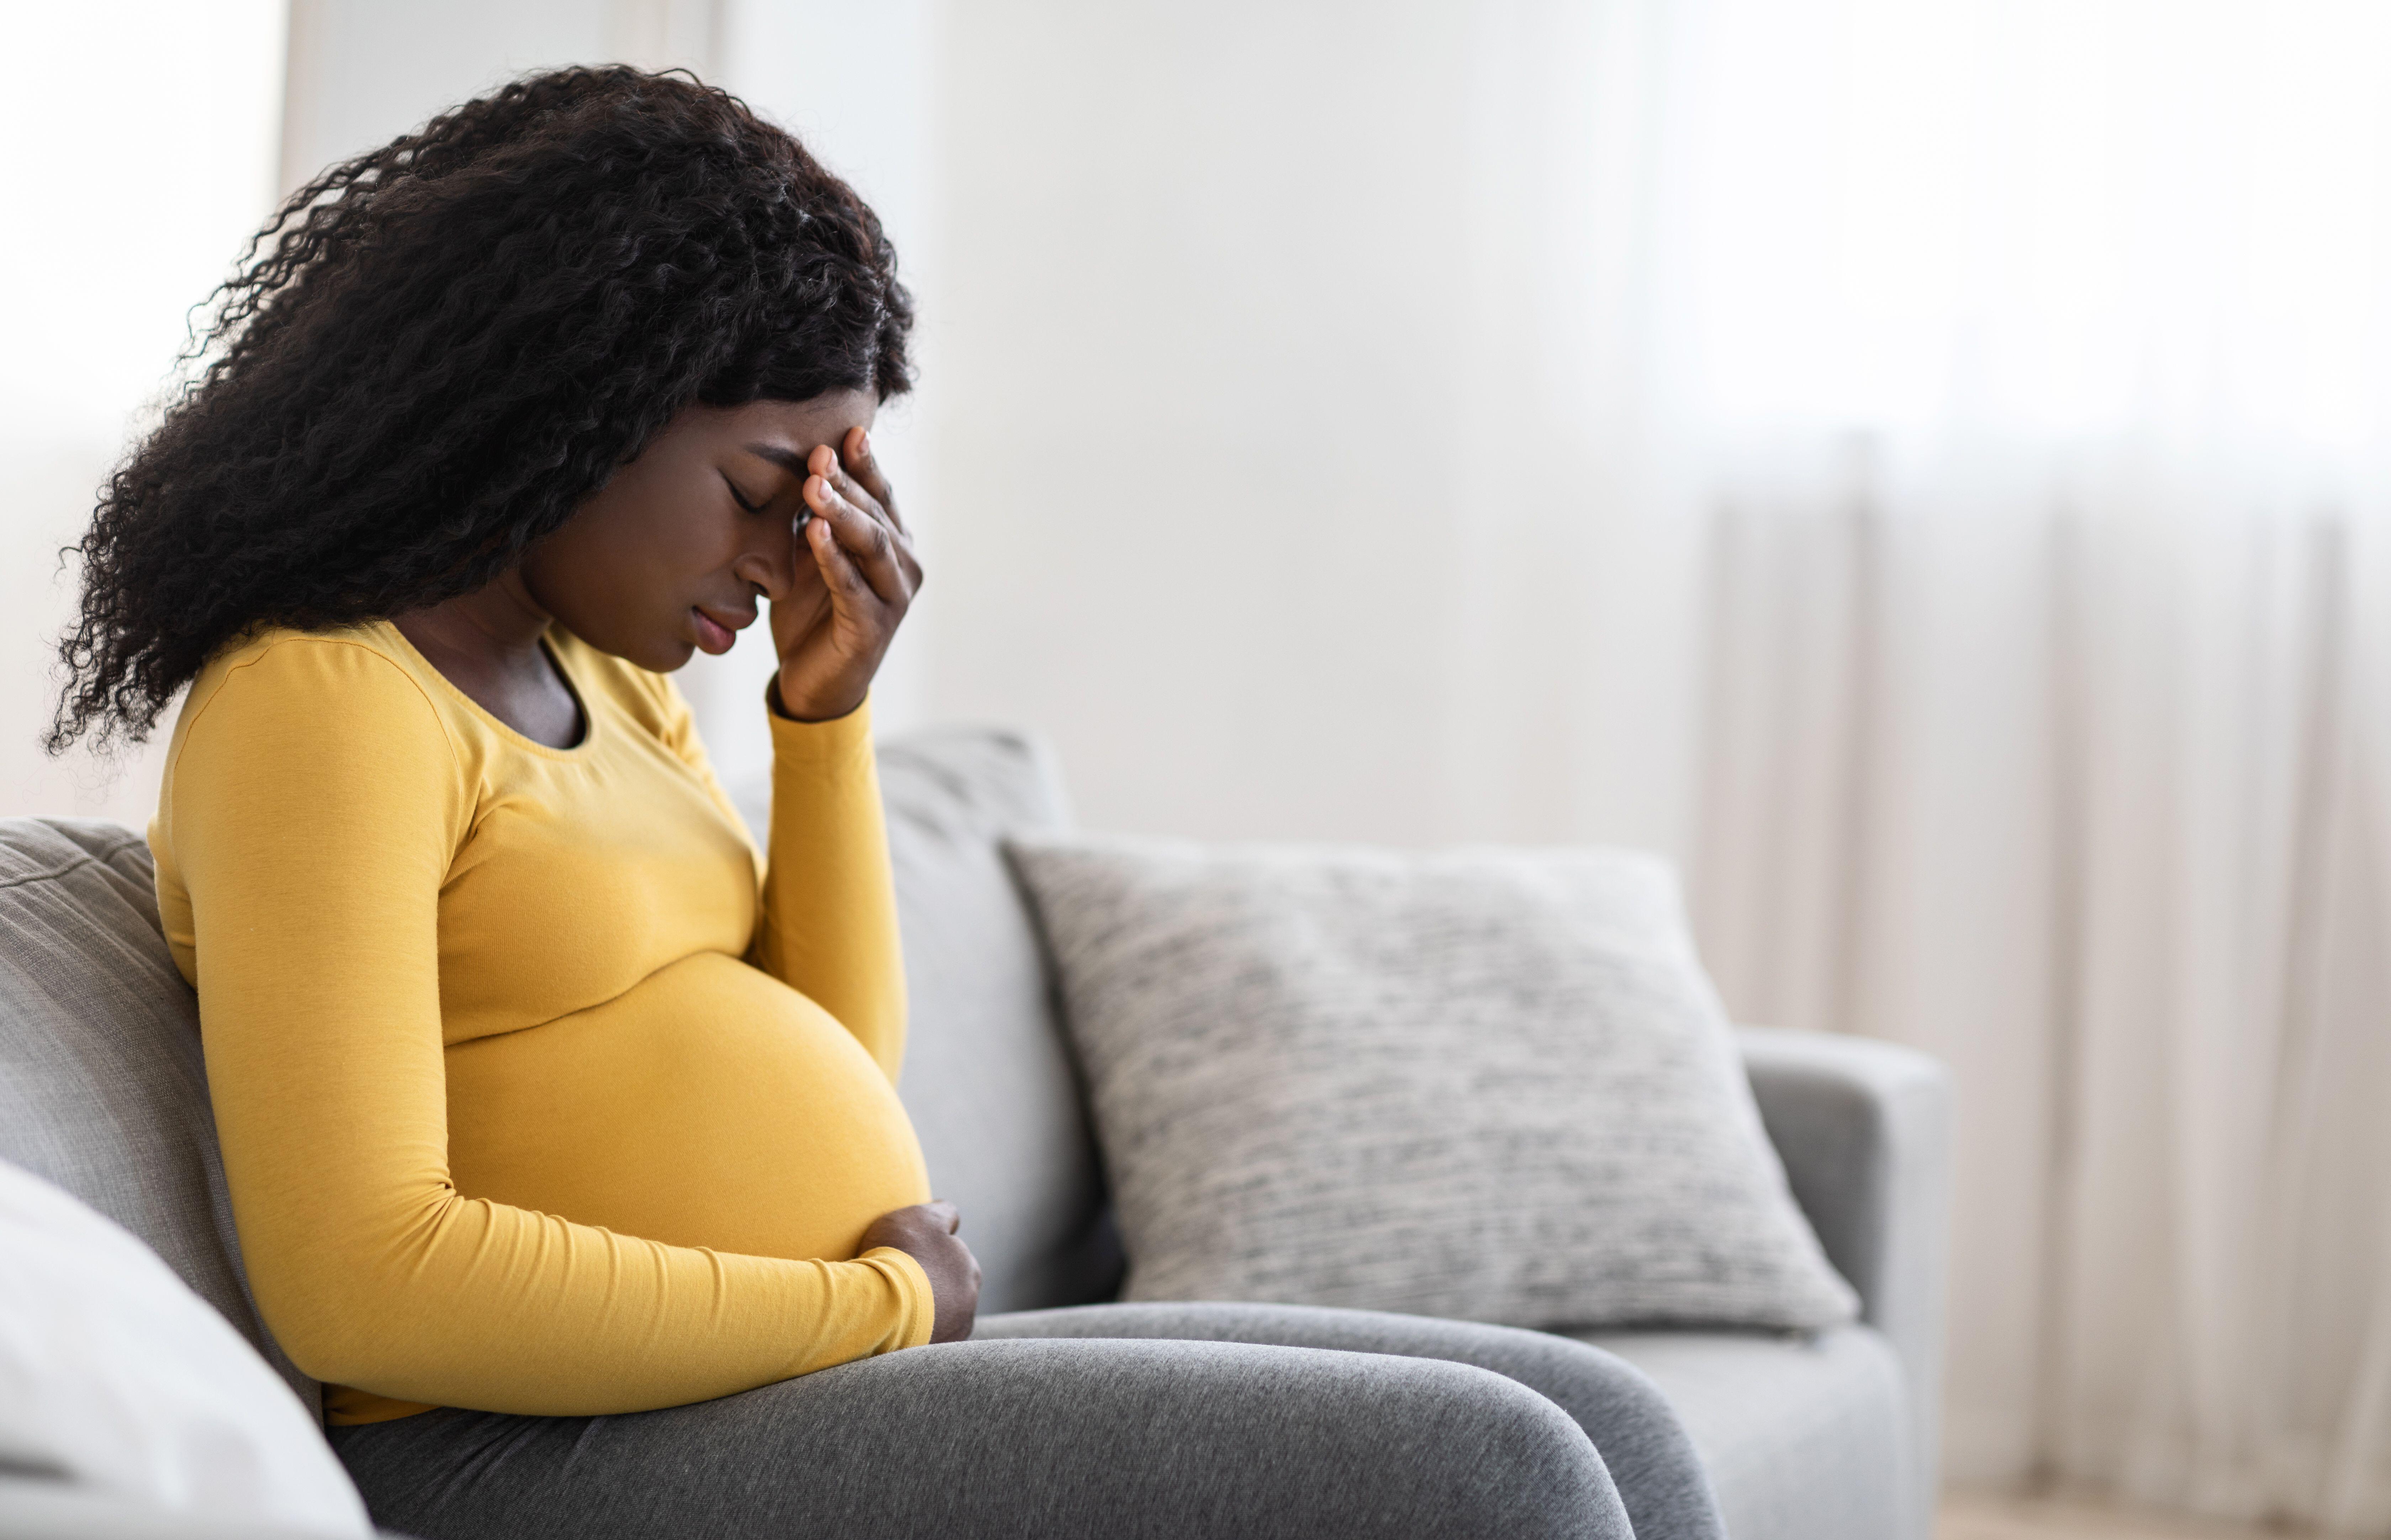 <p>A new study of women suffering from hyperemesis gravidarum found that 4.9 per cent of women terminated a wanted pregnancy and 25.5 per cent of women thought about suicide.</p>